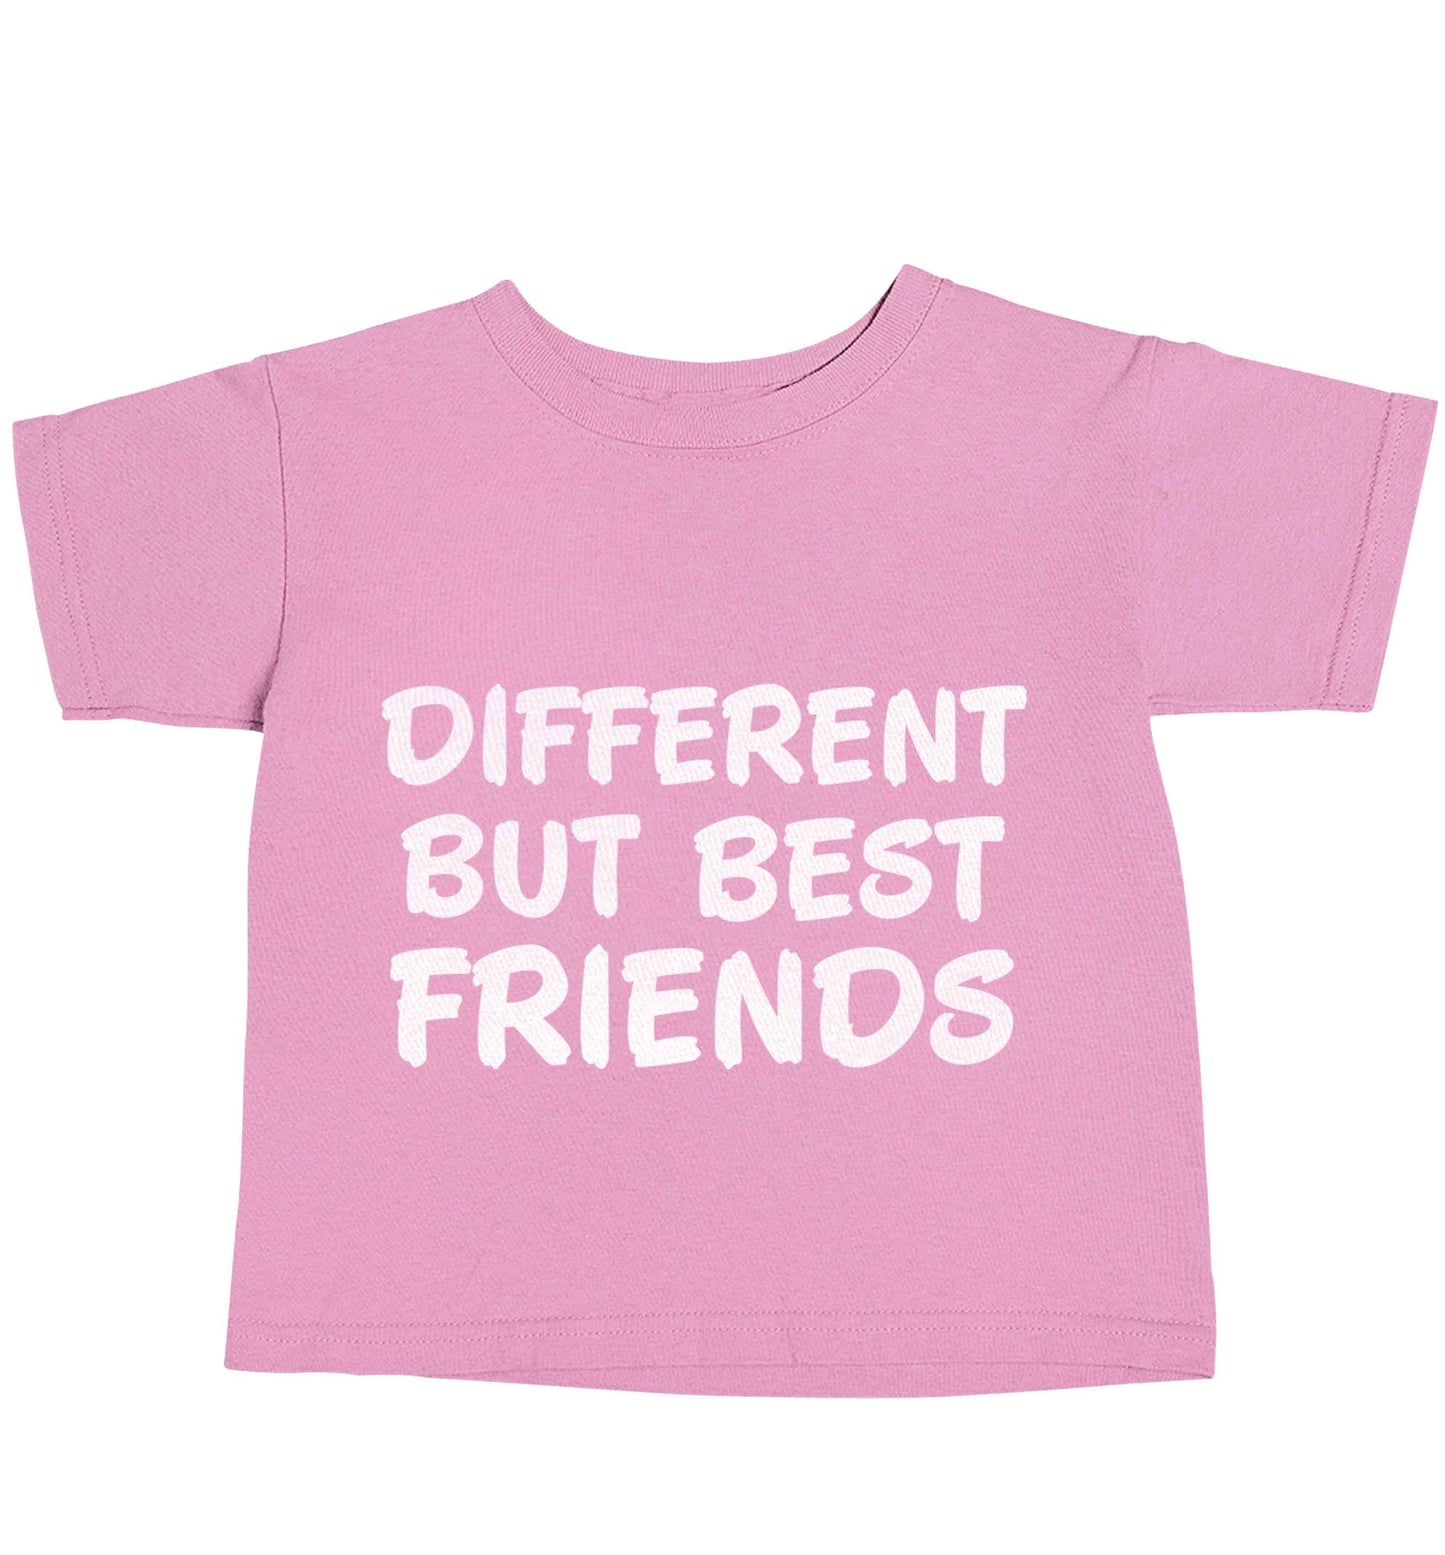 Different but best friends light pink baby toddler Tshirt 2 Years